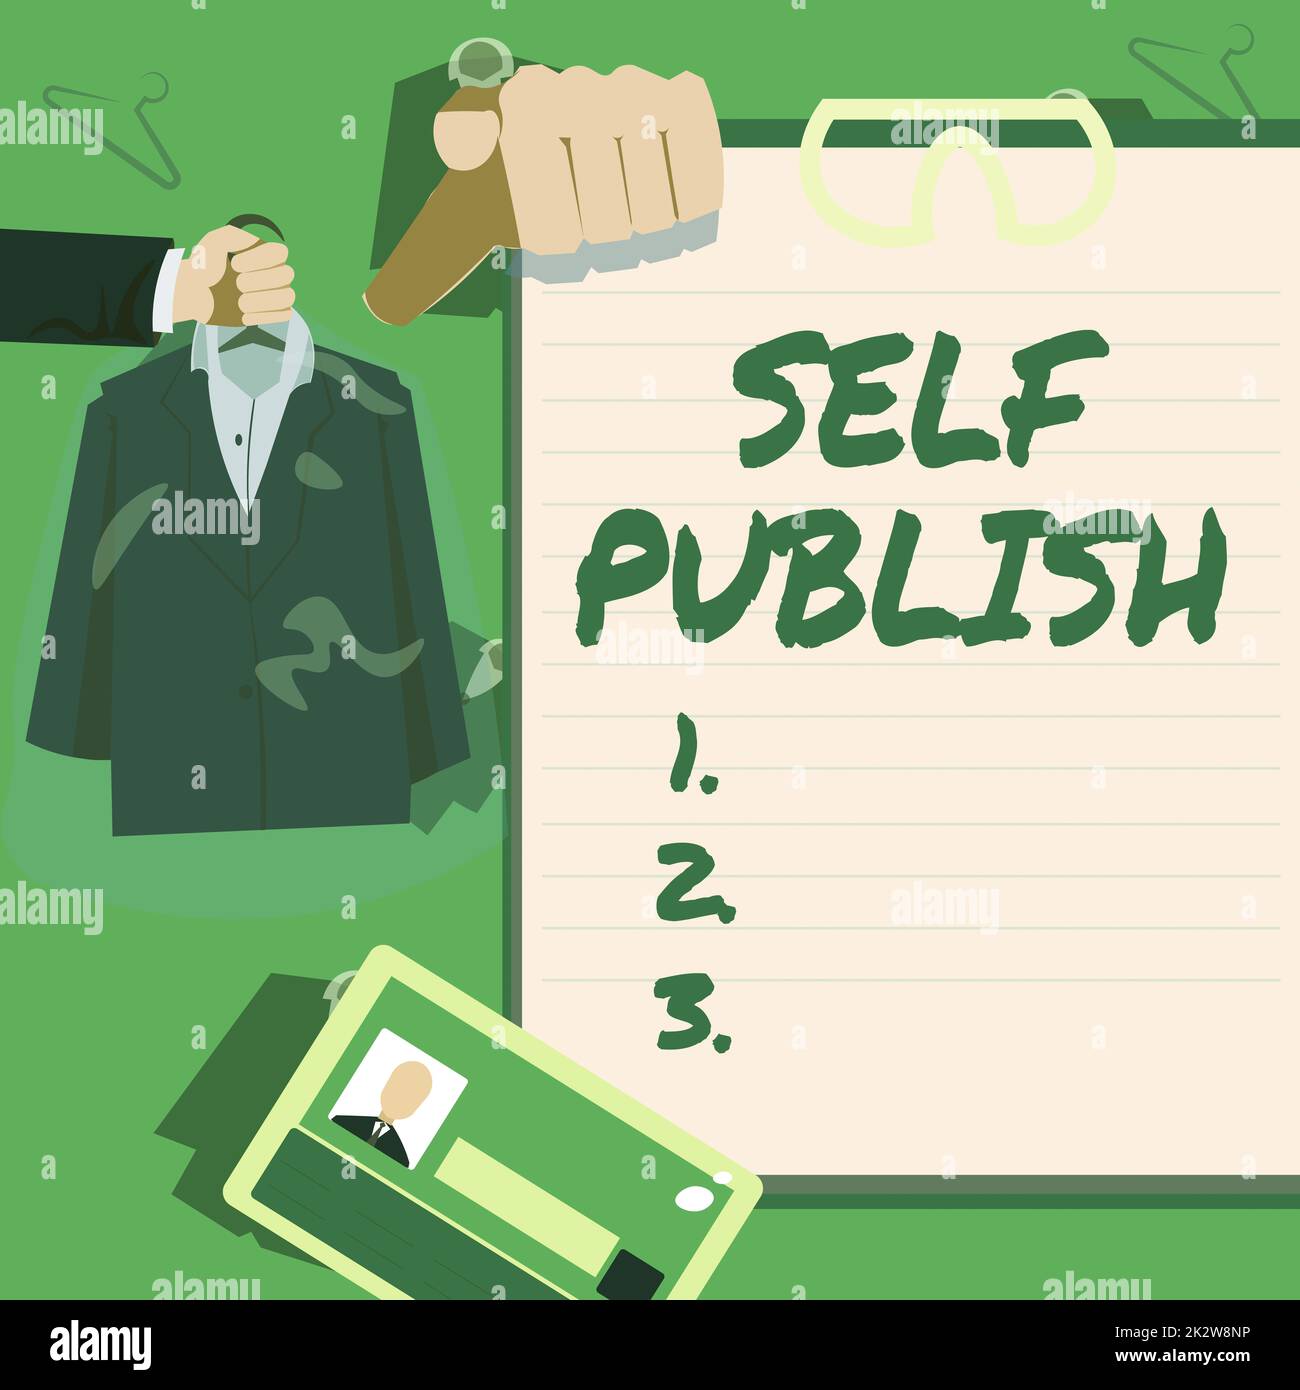 Sign displaying Self Publish. Concept meaning Published work independently and at own expense Indie Author Hands Holding Uniform Showing New Open Career Opportunities. Stock Photo